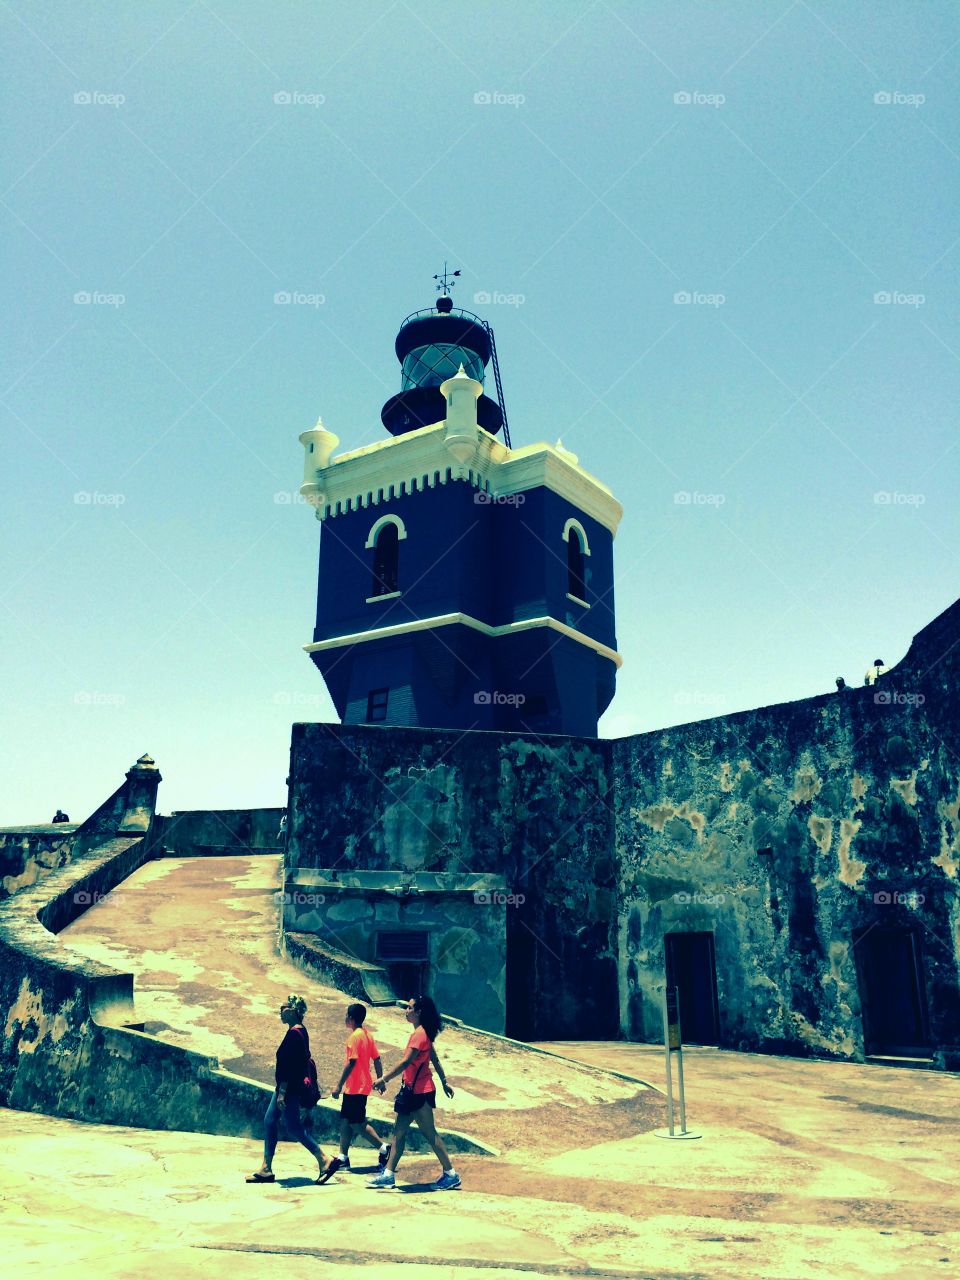 Fortified Light. Newly renovated lighthouse that stands at the top of El Morro fort in Old San Juan, Puerto Rico.